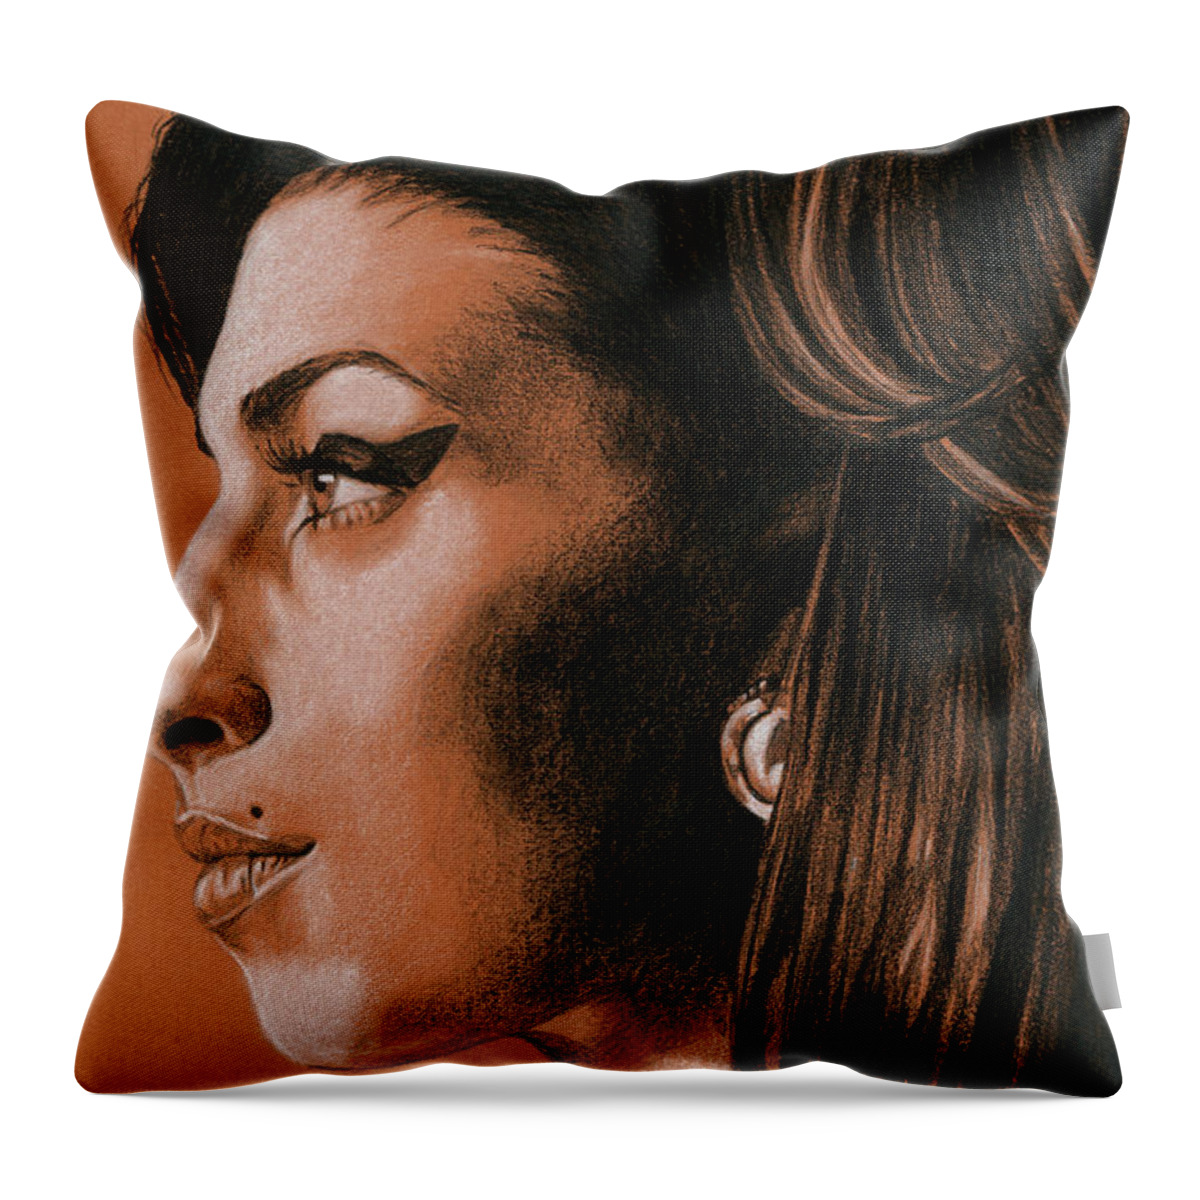 Amy Throw Pillow featuring the drawing Amy by Rob De Vries